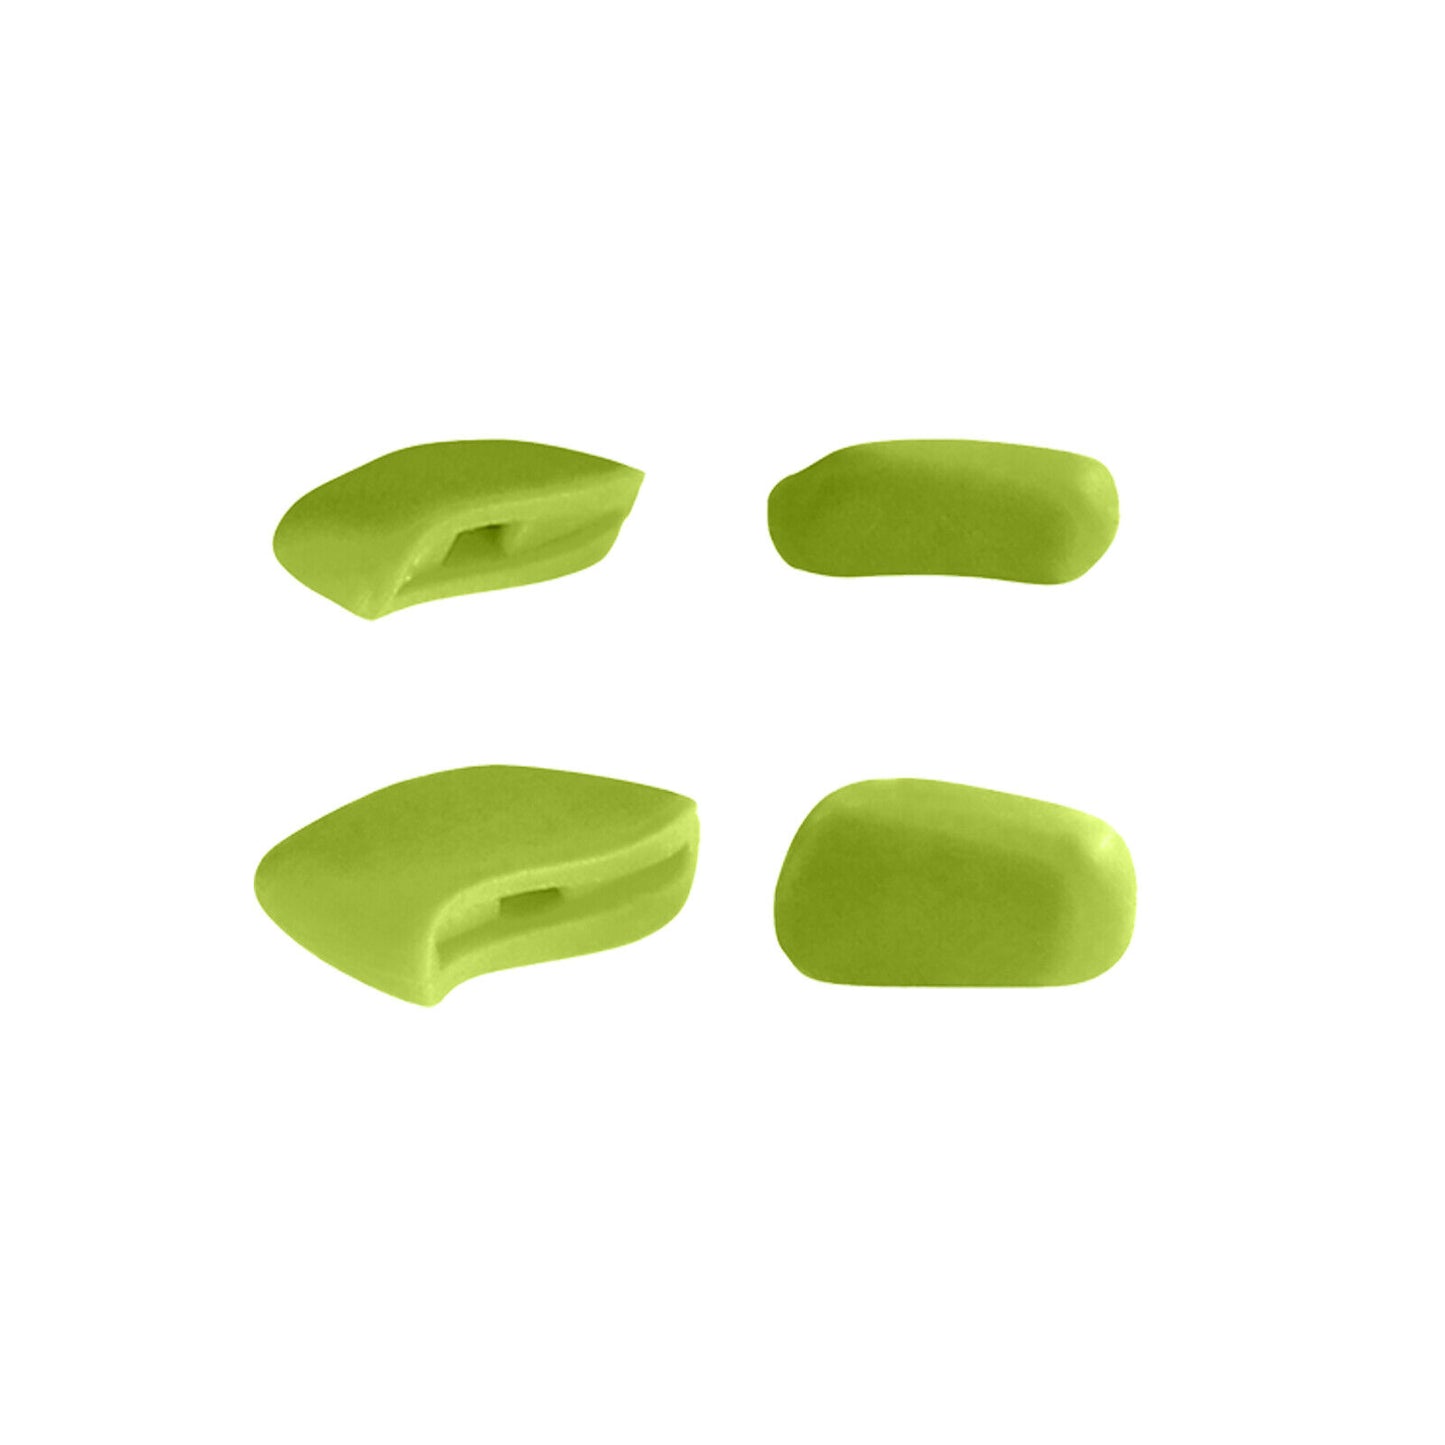 Hawkry Replacement Nosepieces Kits for - Oakley Flak Beta OO9363 - Options